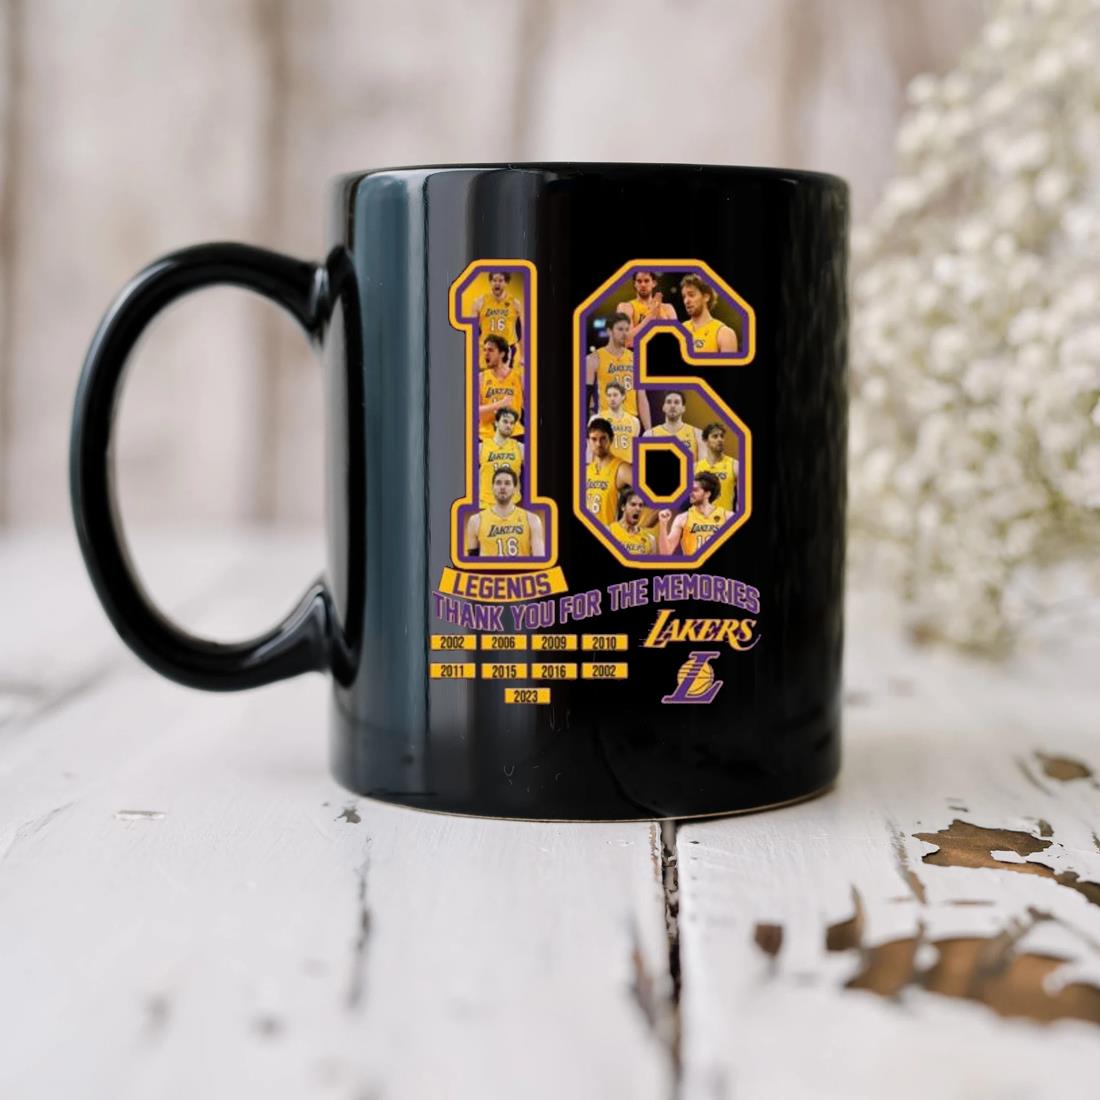 16 Lakers Legends Thank You For The Memories Mug